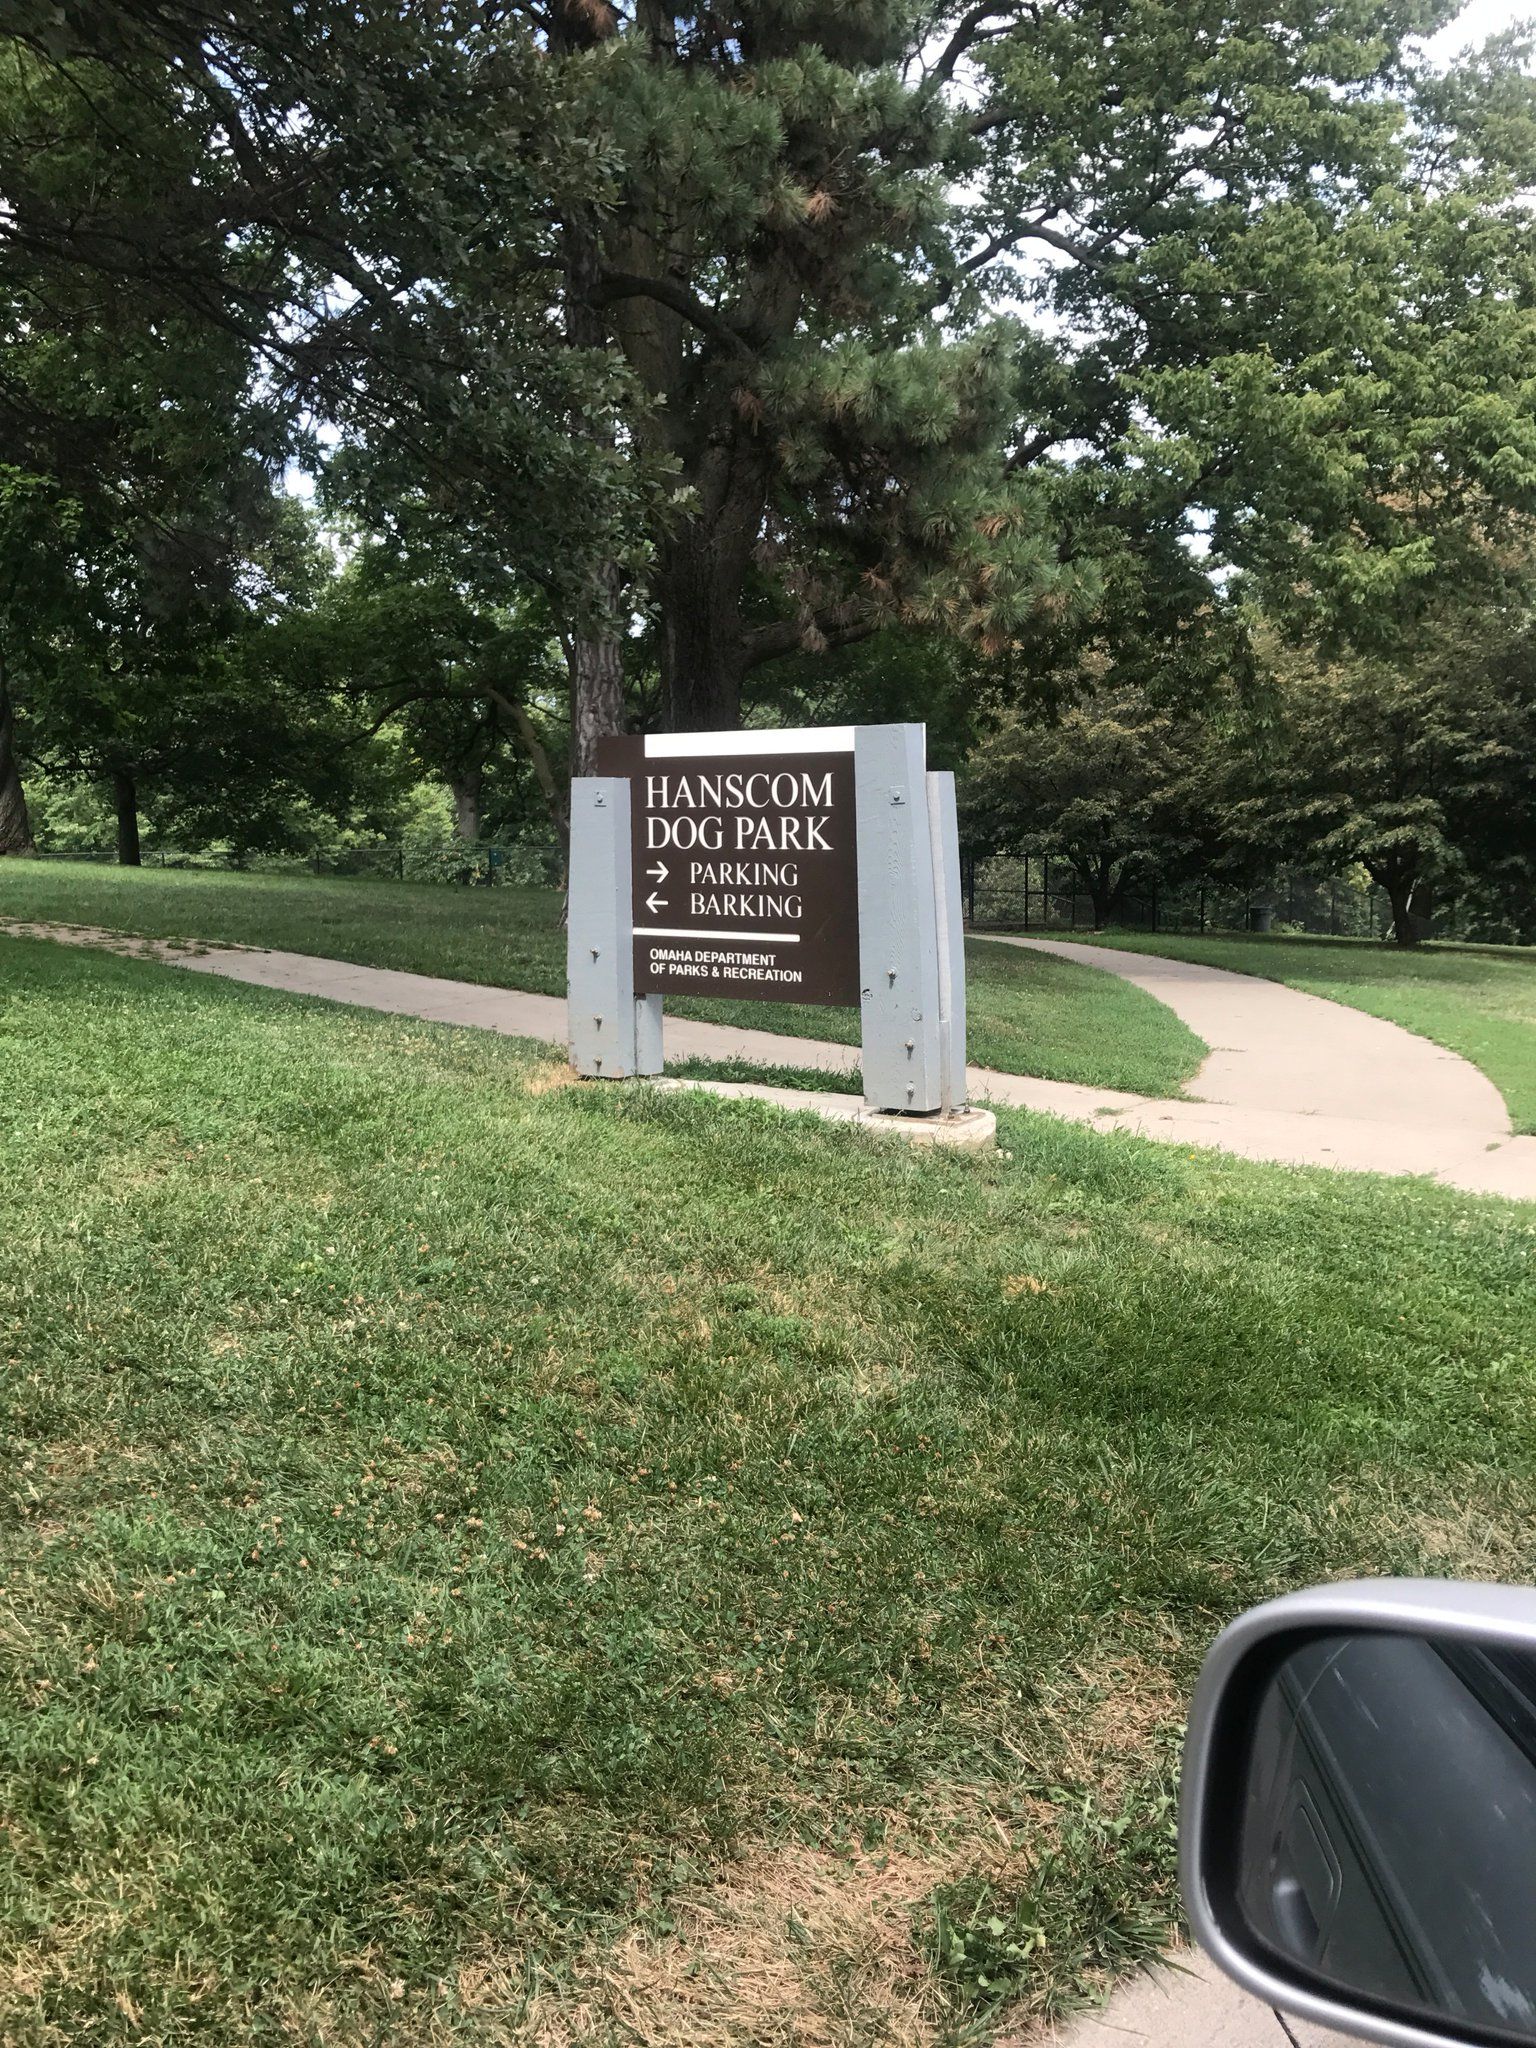 Sign for a dog park in my city